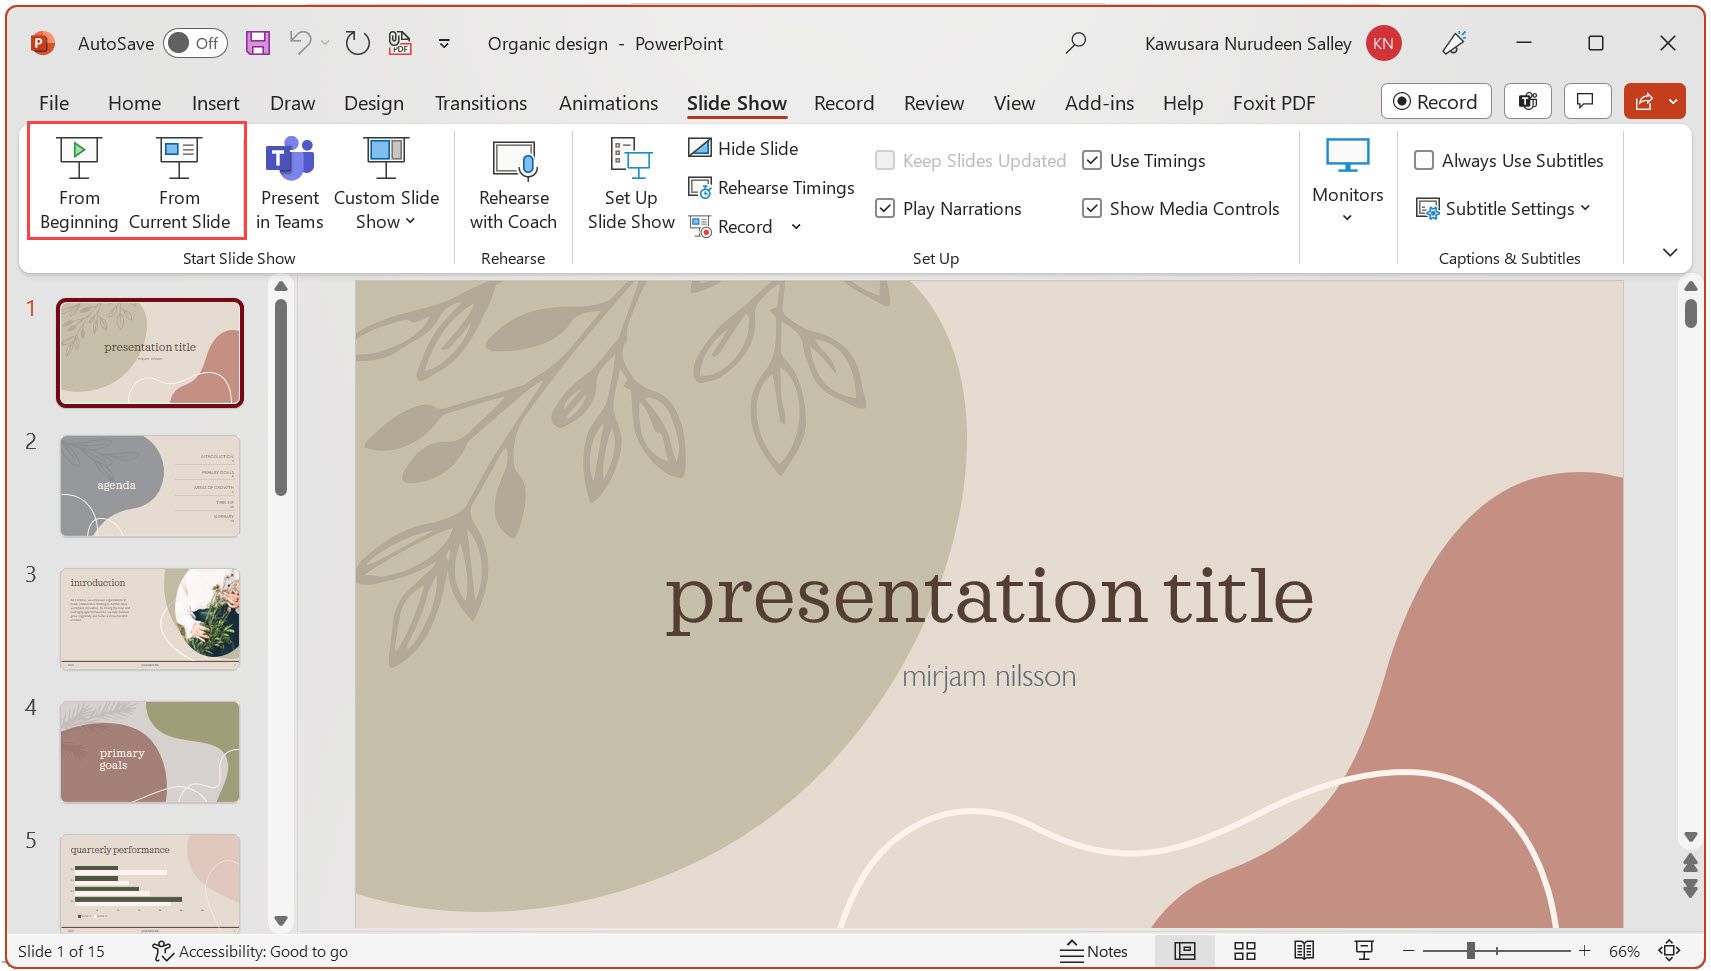 Launch slideshow from beginning or current slide in PowerPoint